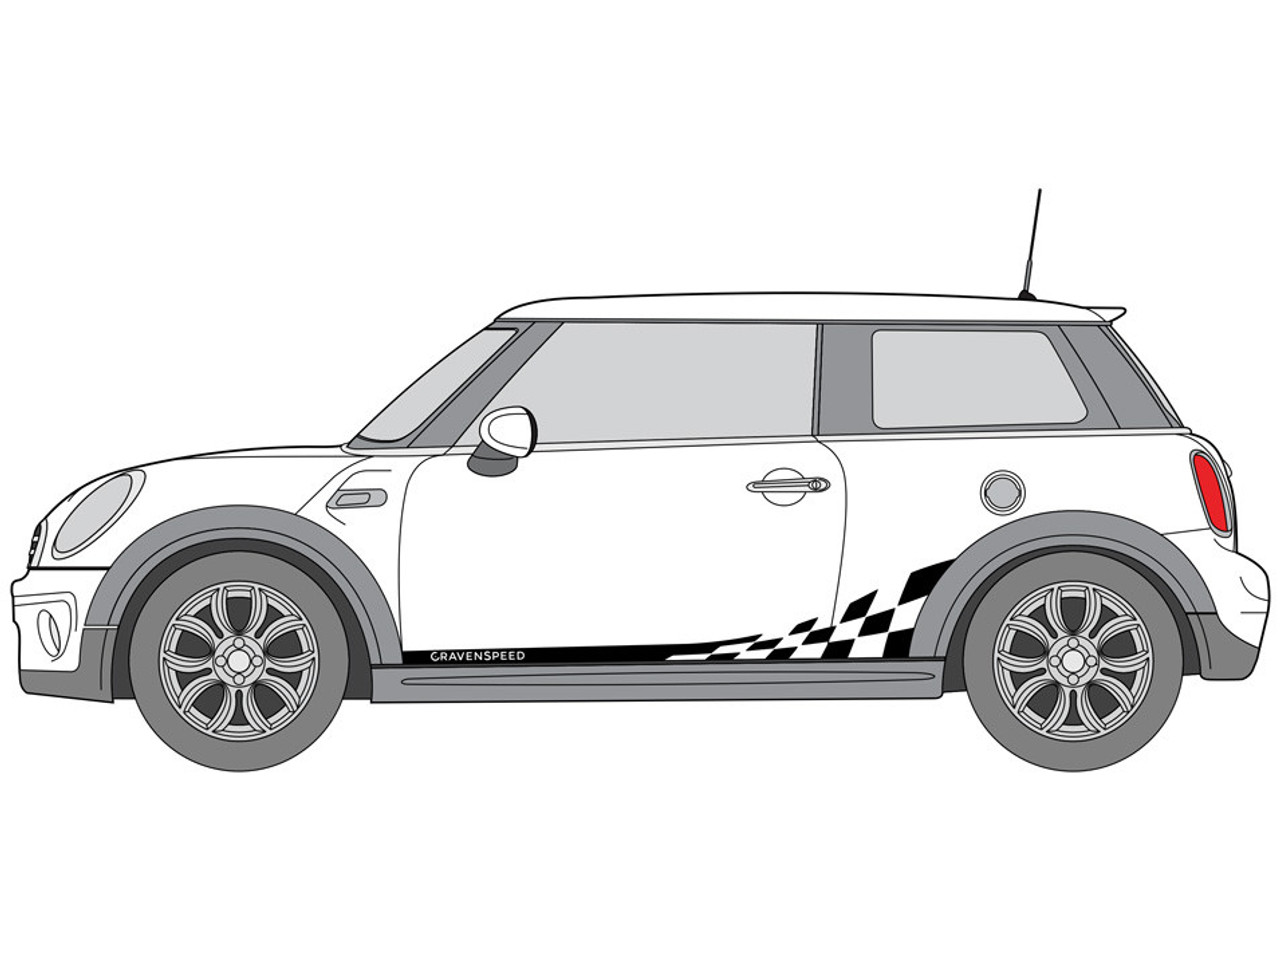 https://cdn11.bigcommerce.com/s-351ed/images/stencil/1280x1280/products/21564/86139/decal_sets_for_mini_cooper_f56_checkered_flag_side_stripes_matte_black_718L4P2_21564__77930.1679009337.jpg?c=2